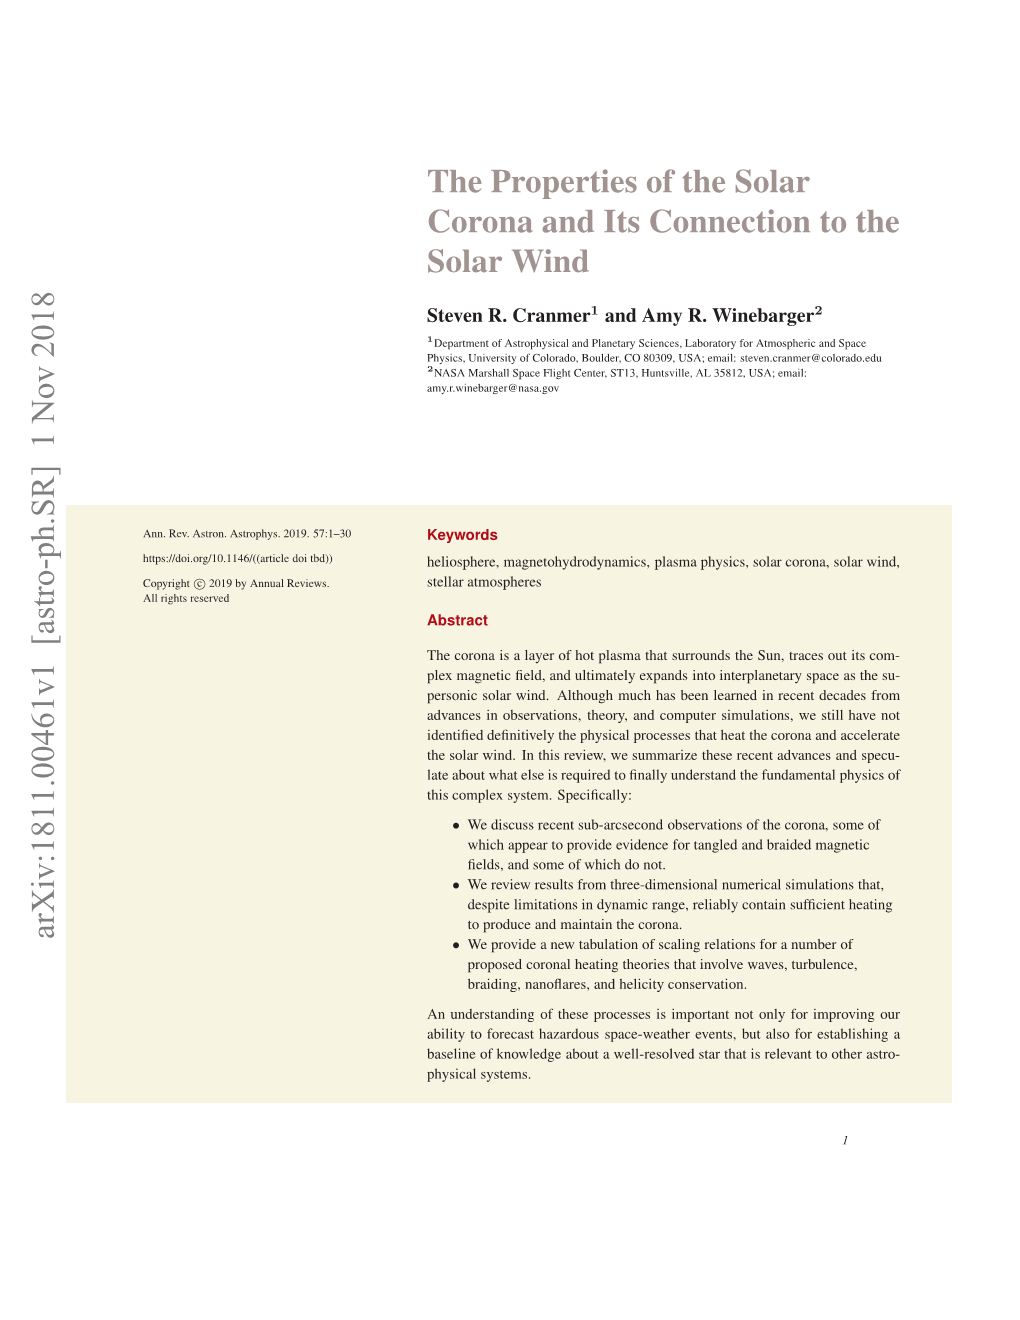 The Properties of the Solar Corona and Its Connection to the Solar Wind